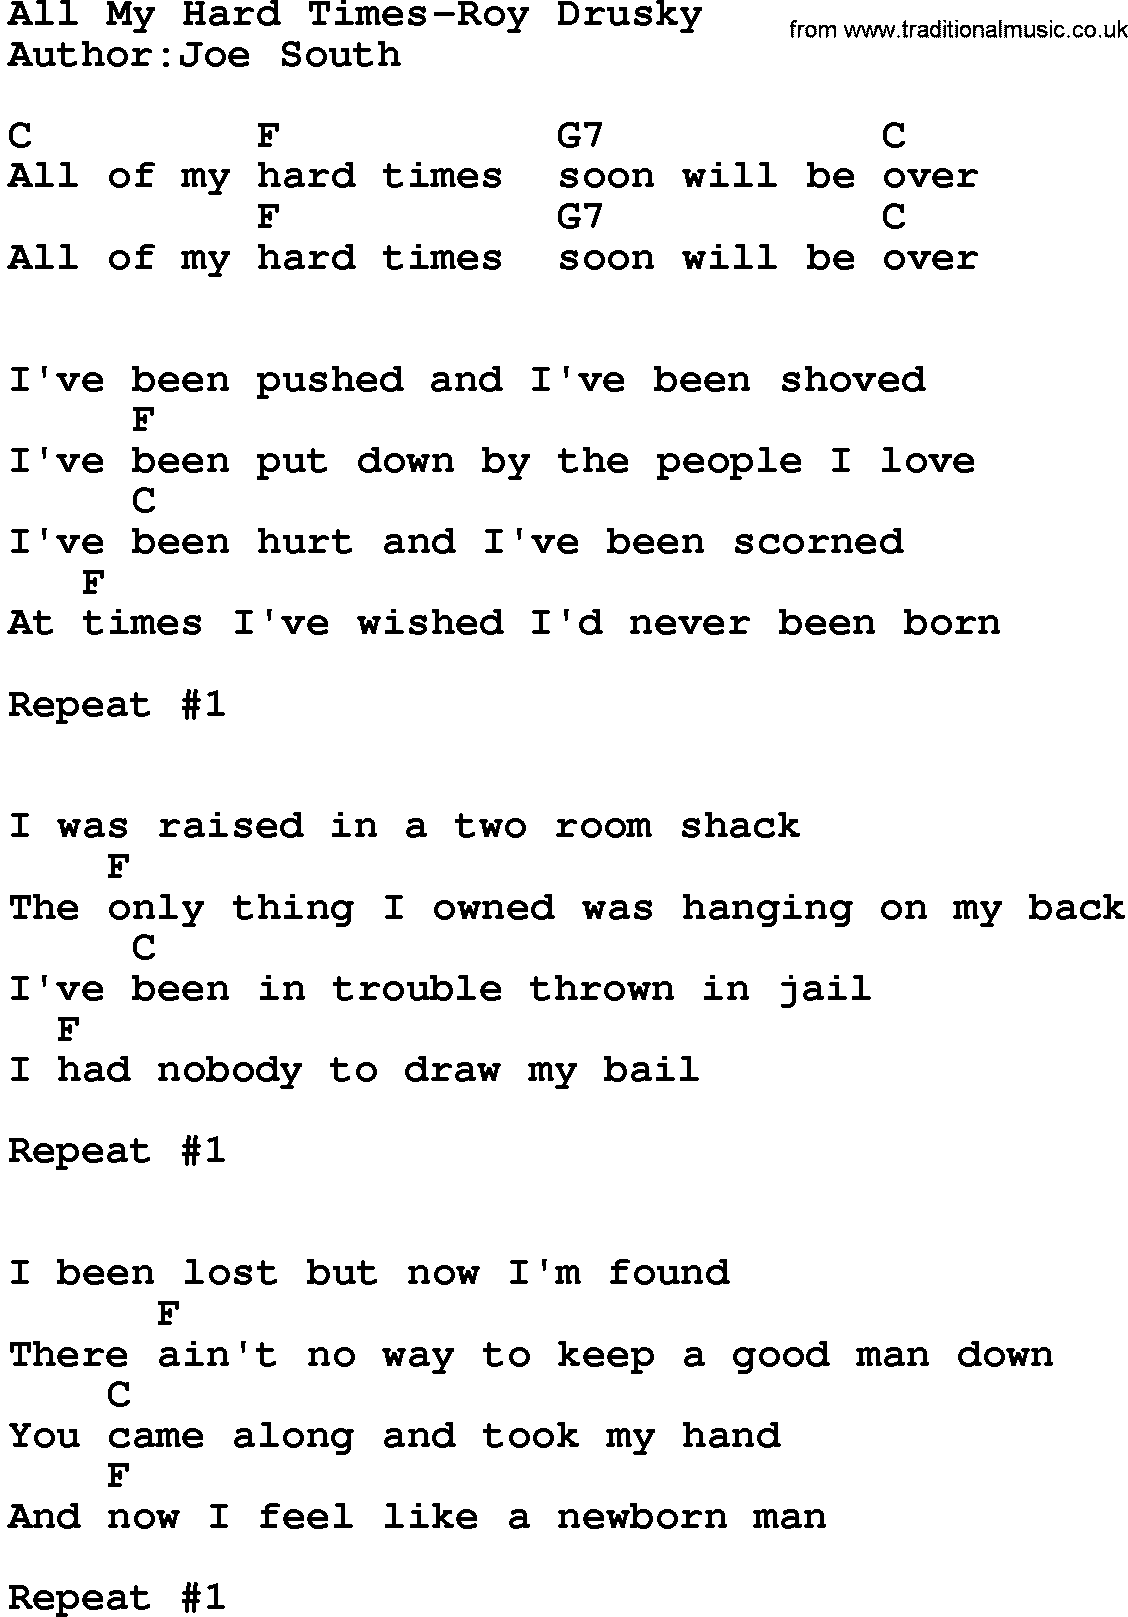 Country music song: All My Hard Times-Roy Drusky lyrics and chords